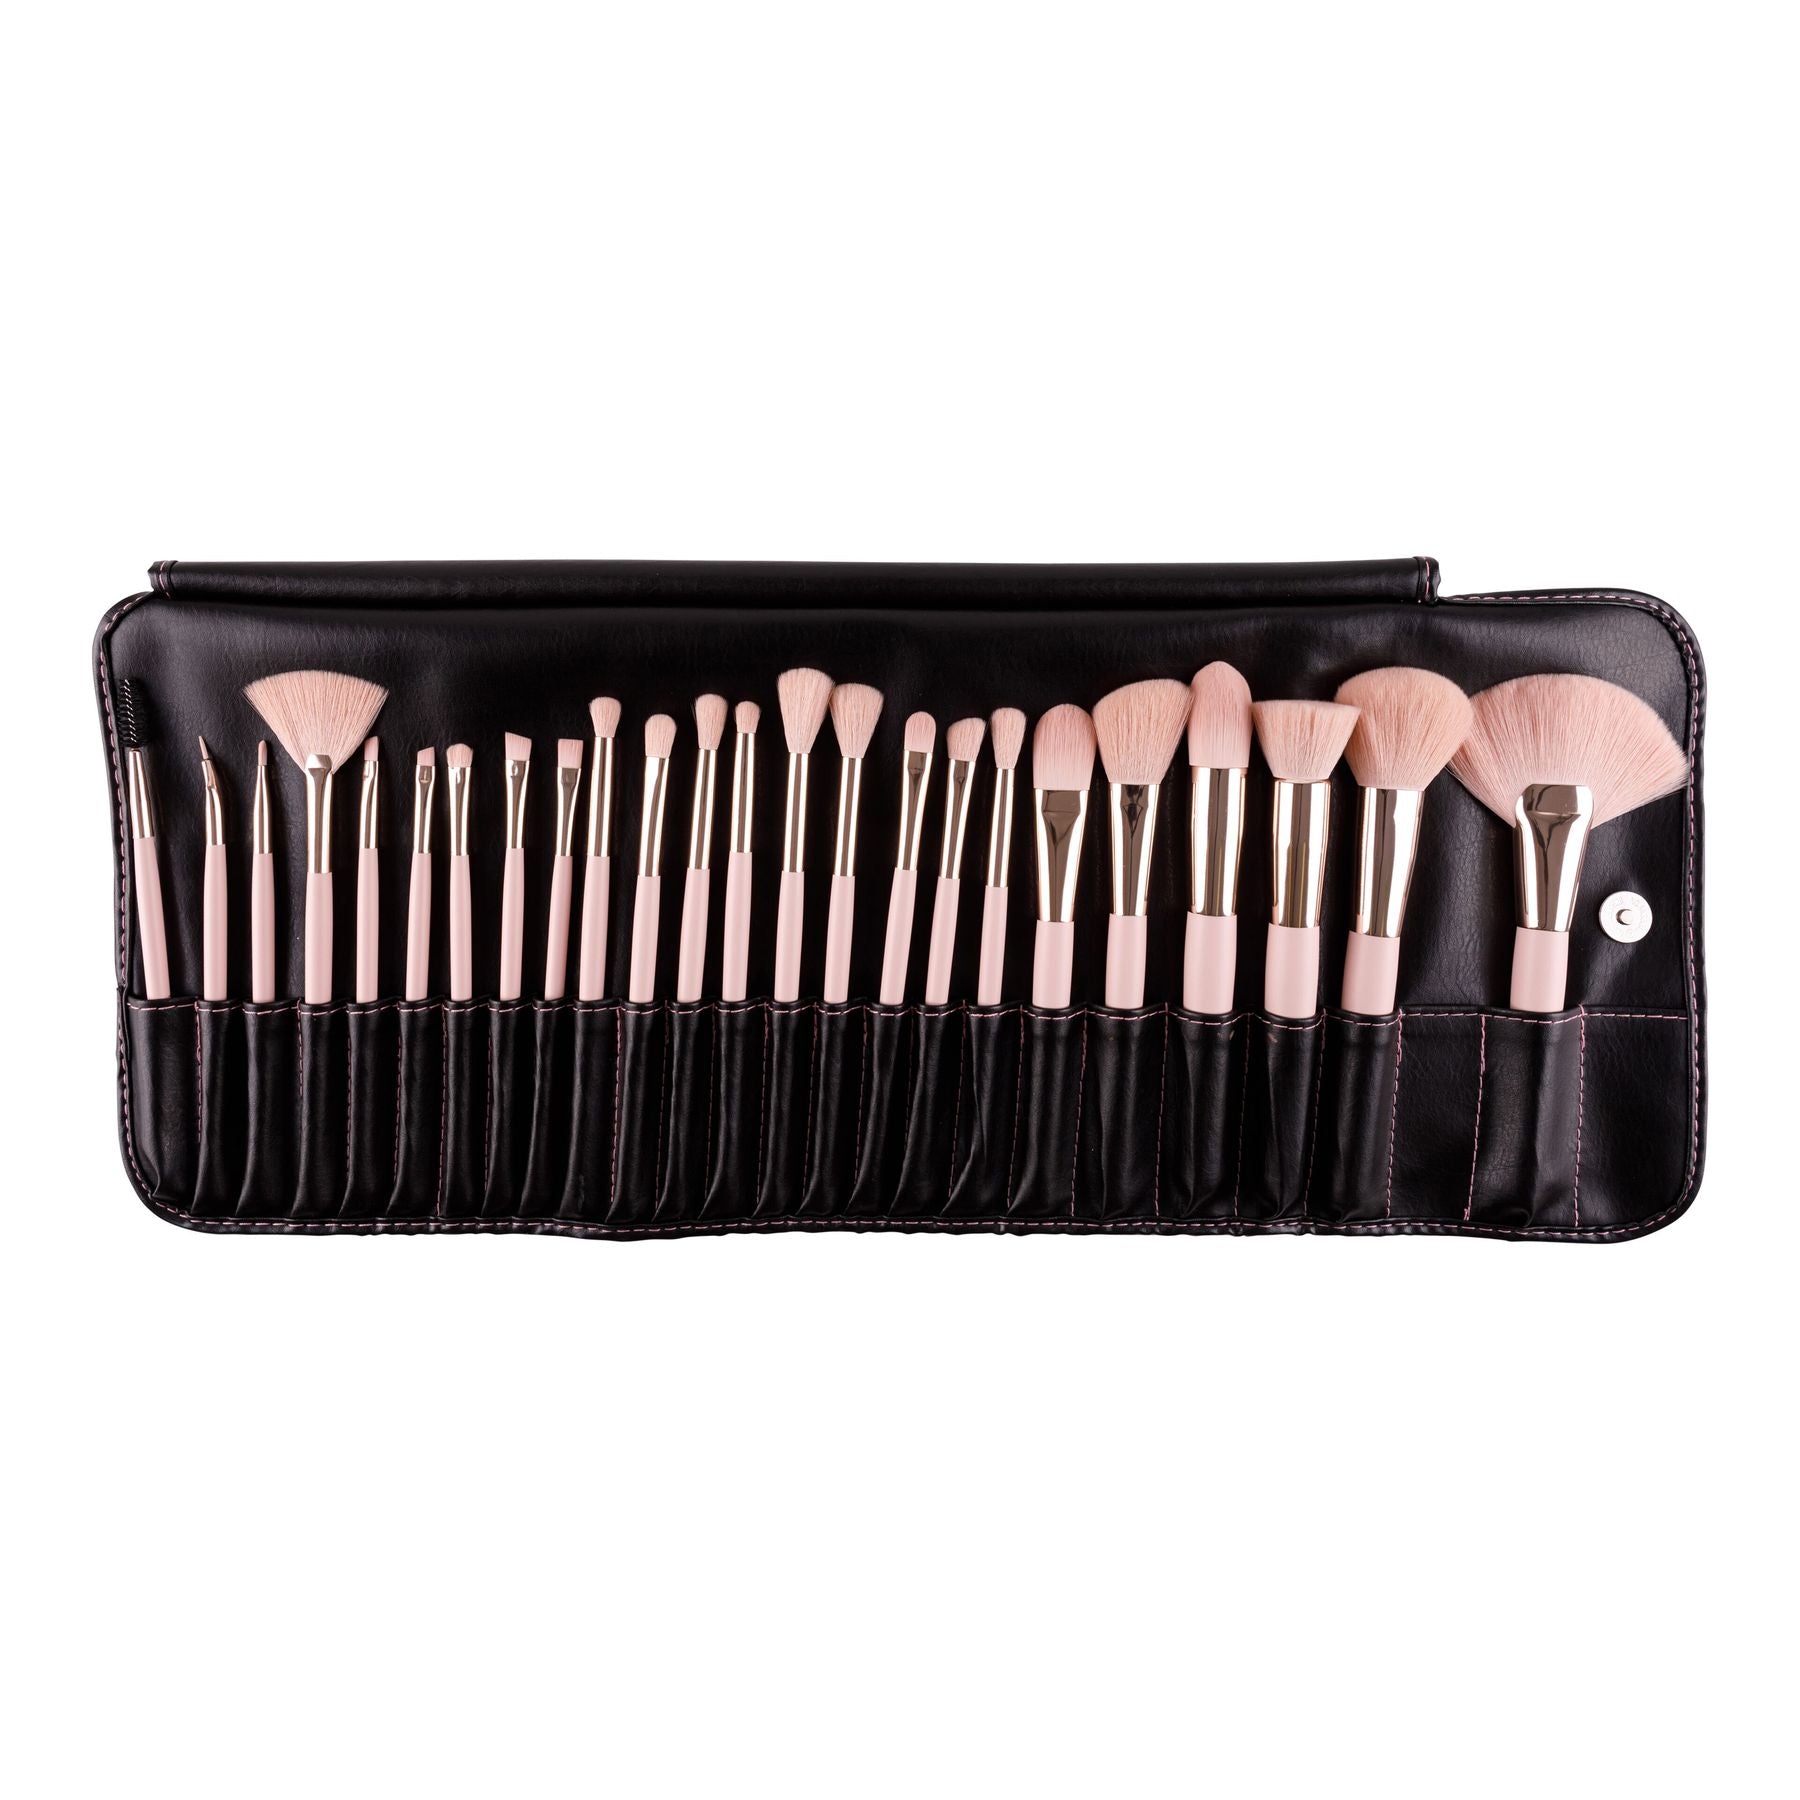 Beauty Creations - Pretty In Pink 24pc Brush Set